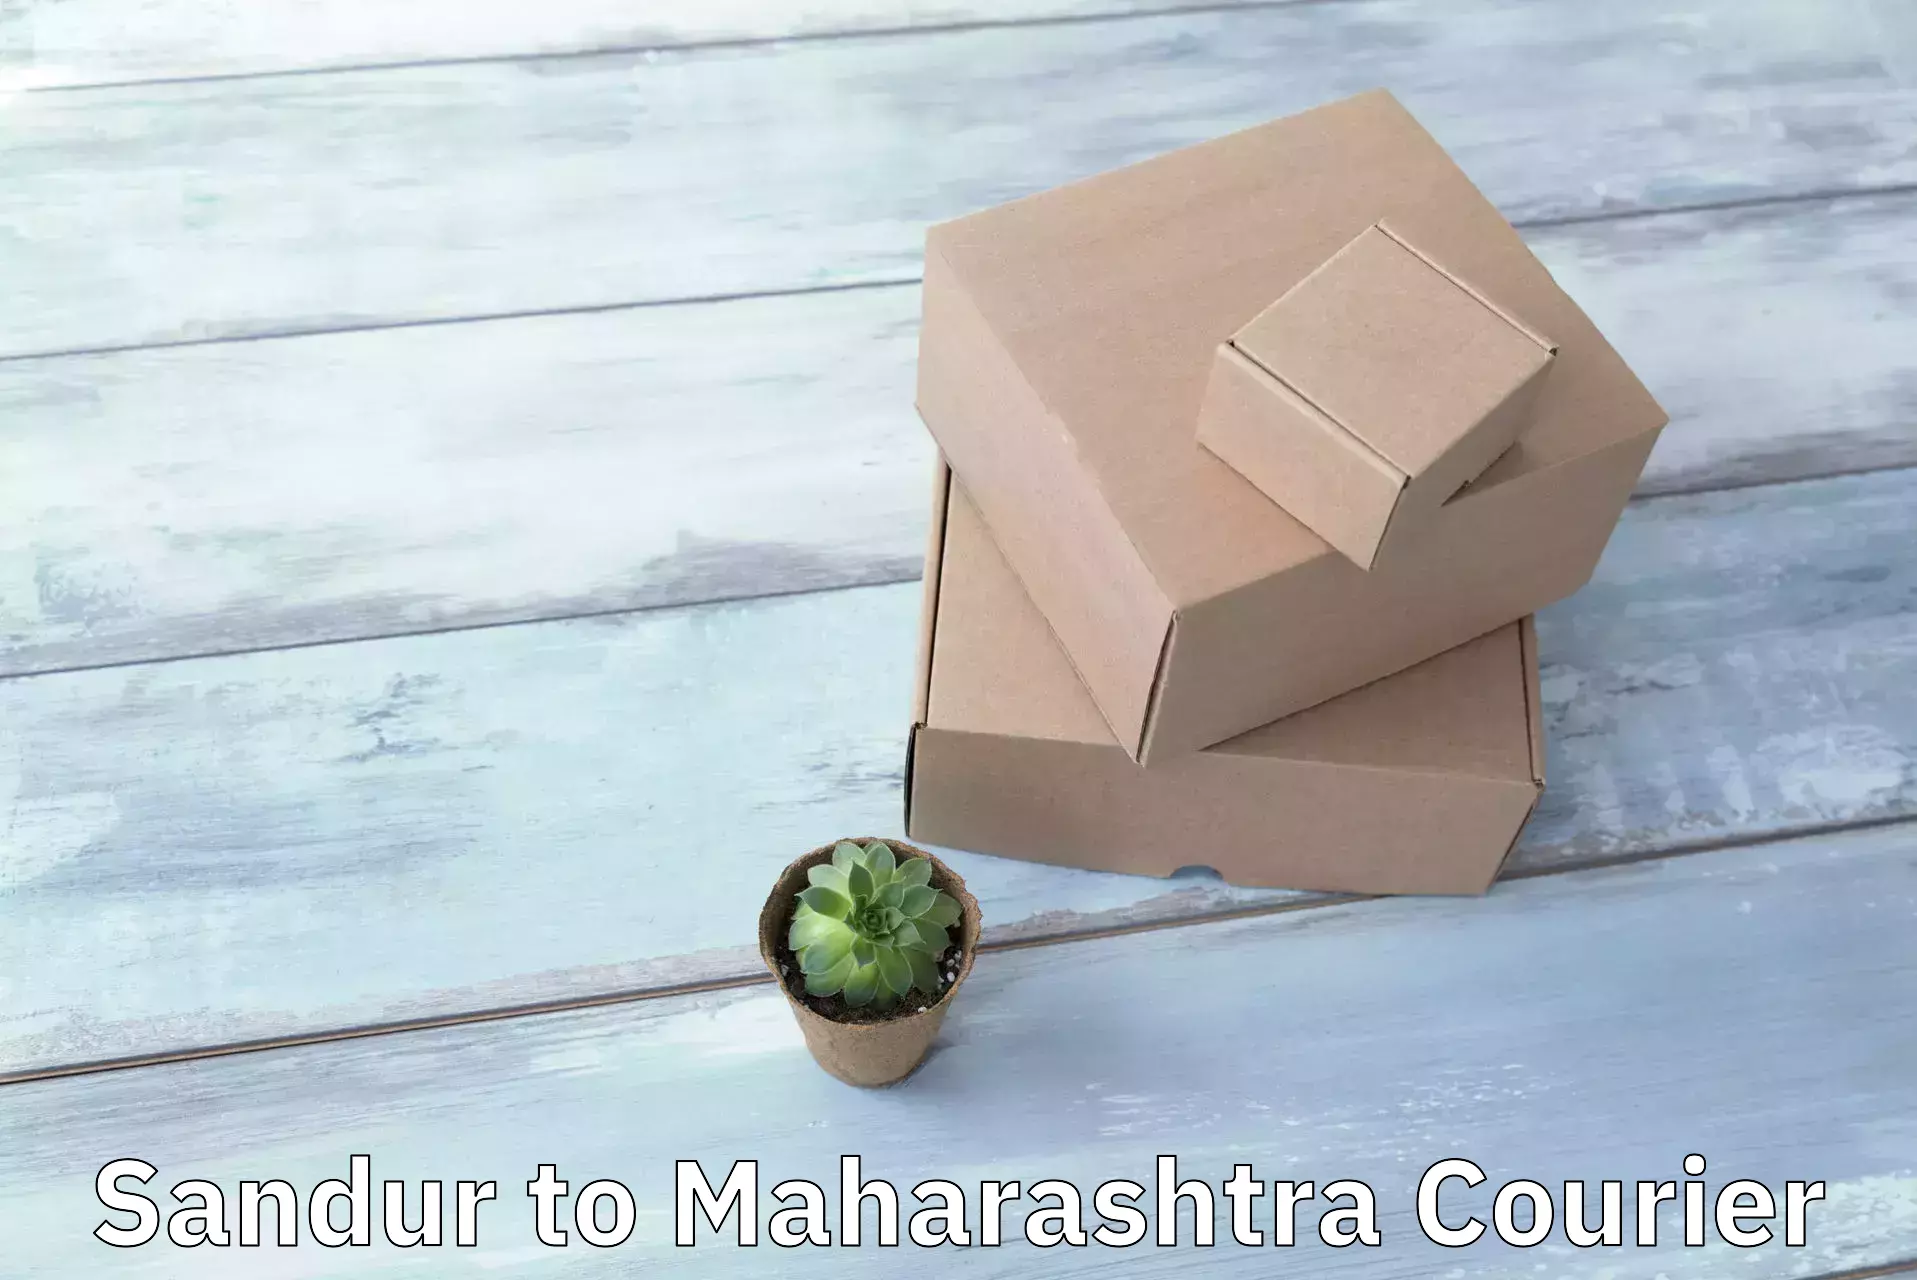 Express delivery solutions Sandur to Maharashtra